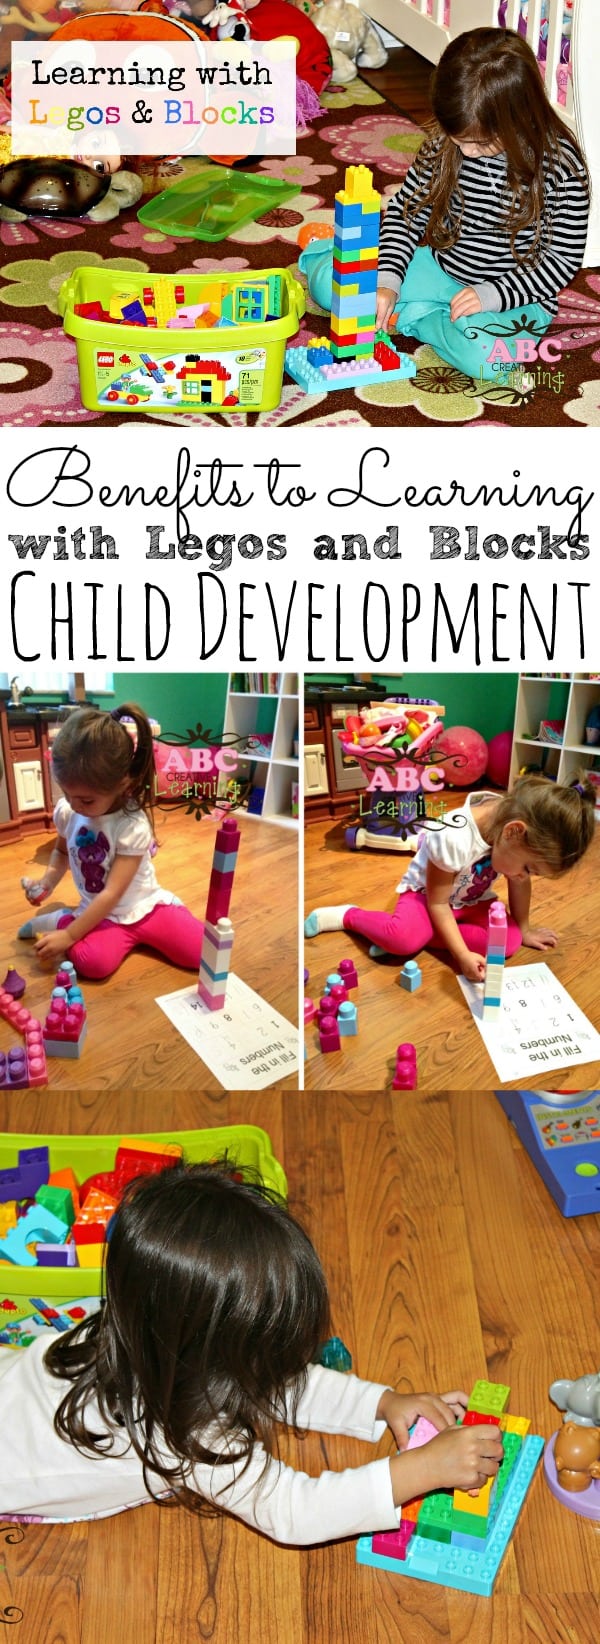 Benefits of Learning with Legos and Blocks | Child Development